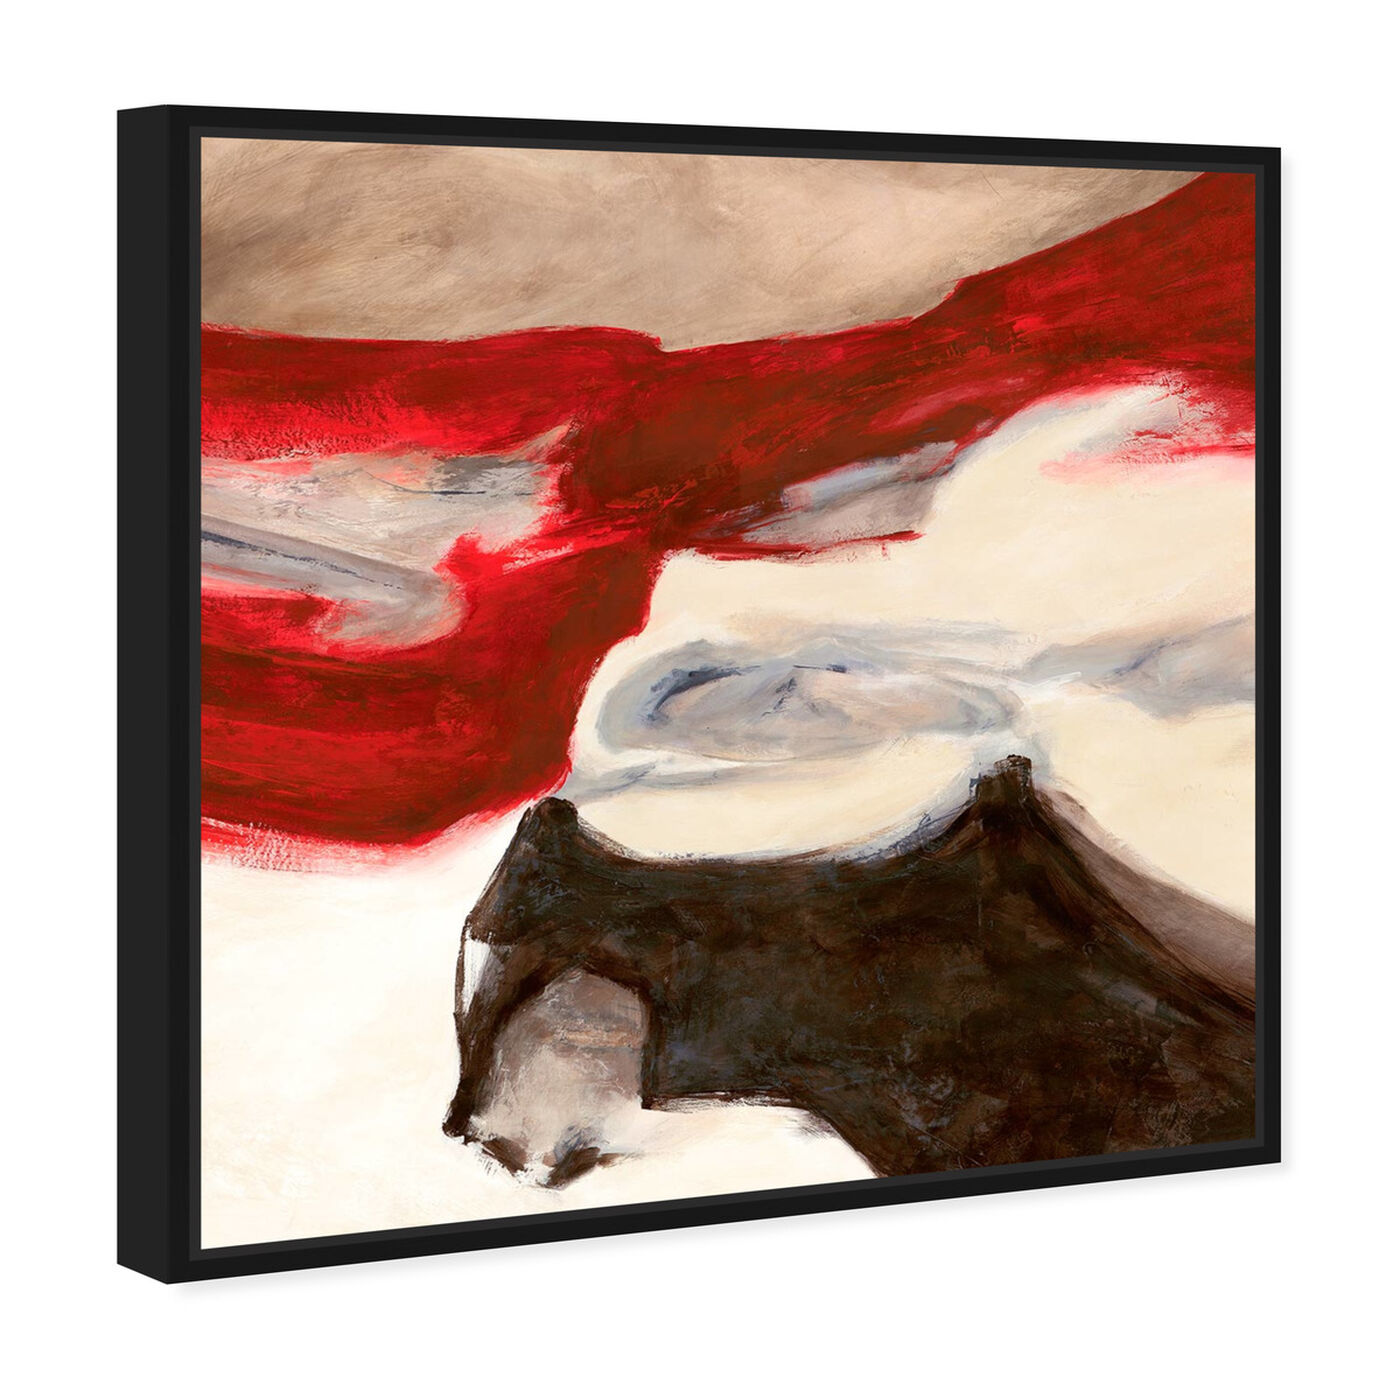 Angled view of Sai - Rubrum IV featuring abstract and paint art.